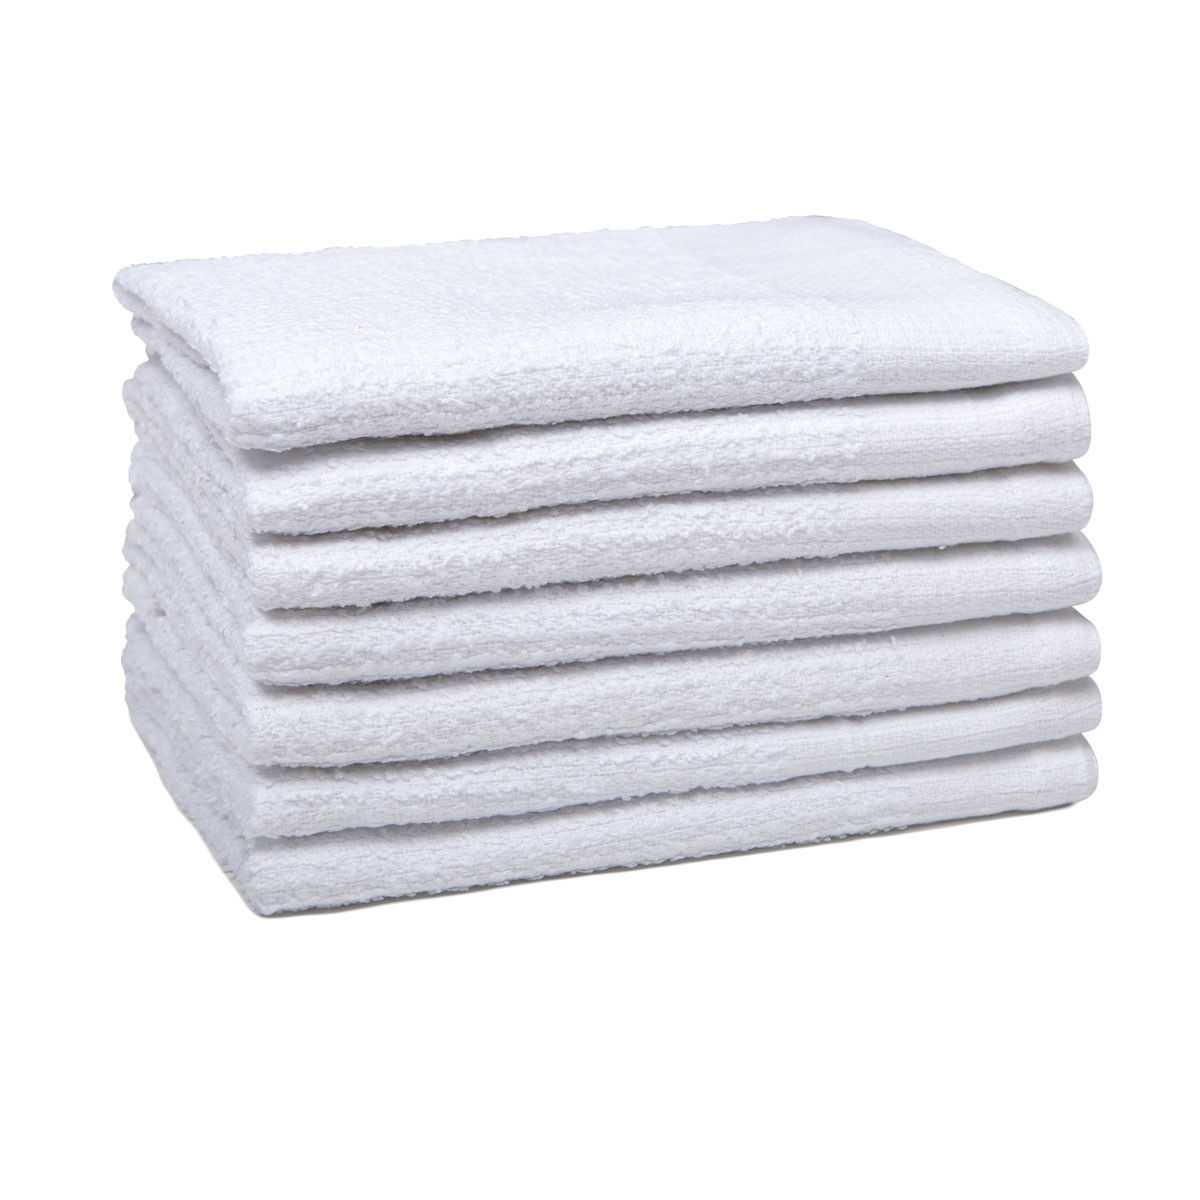 Which Terrycloth bar towels offer maximum absorption?